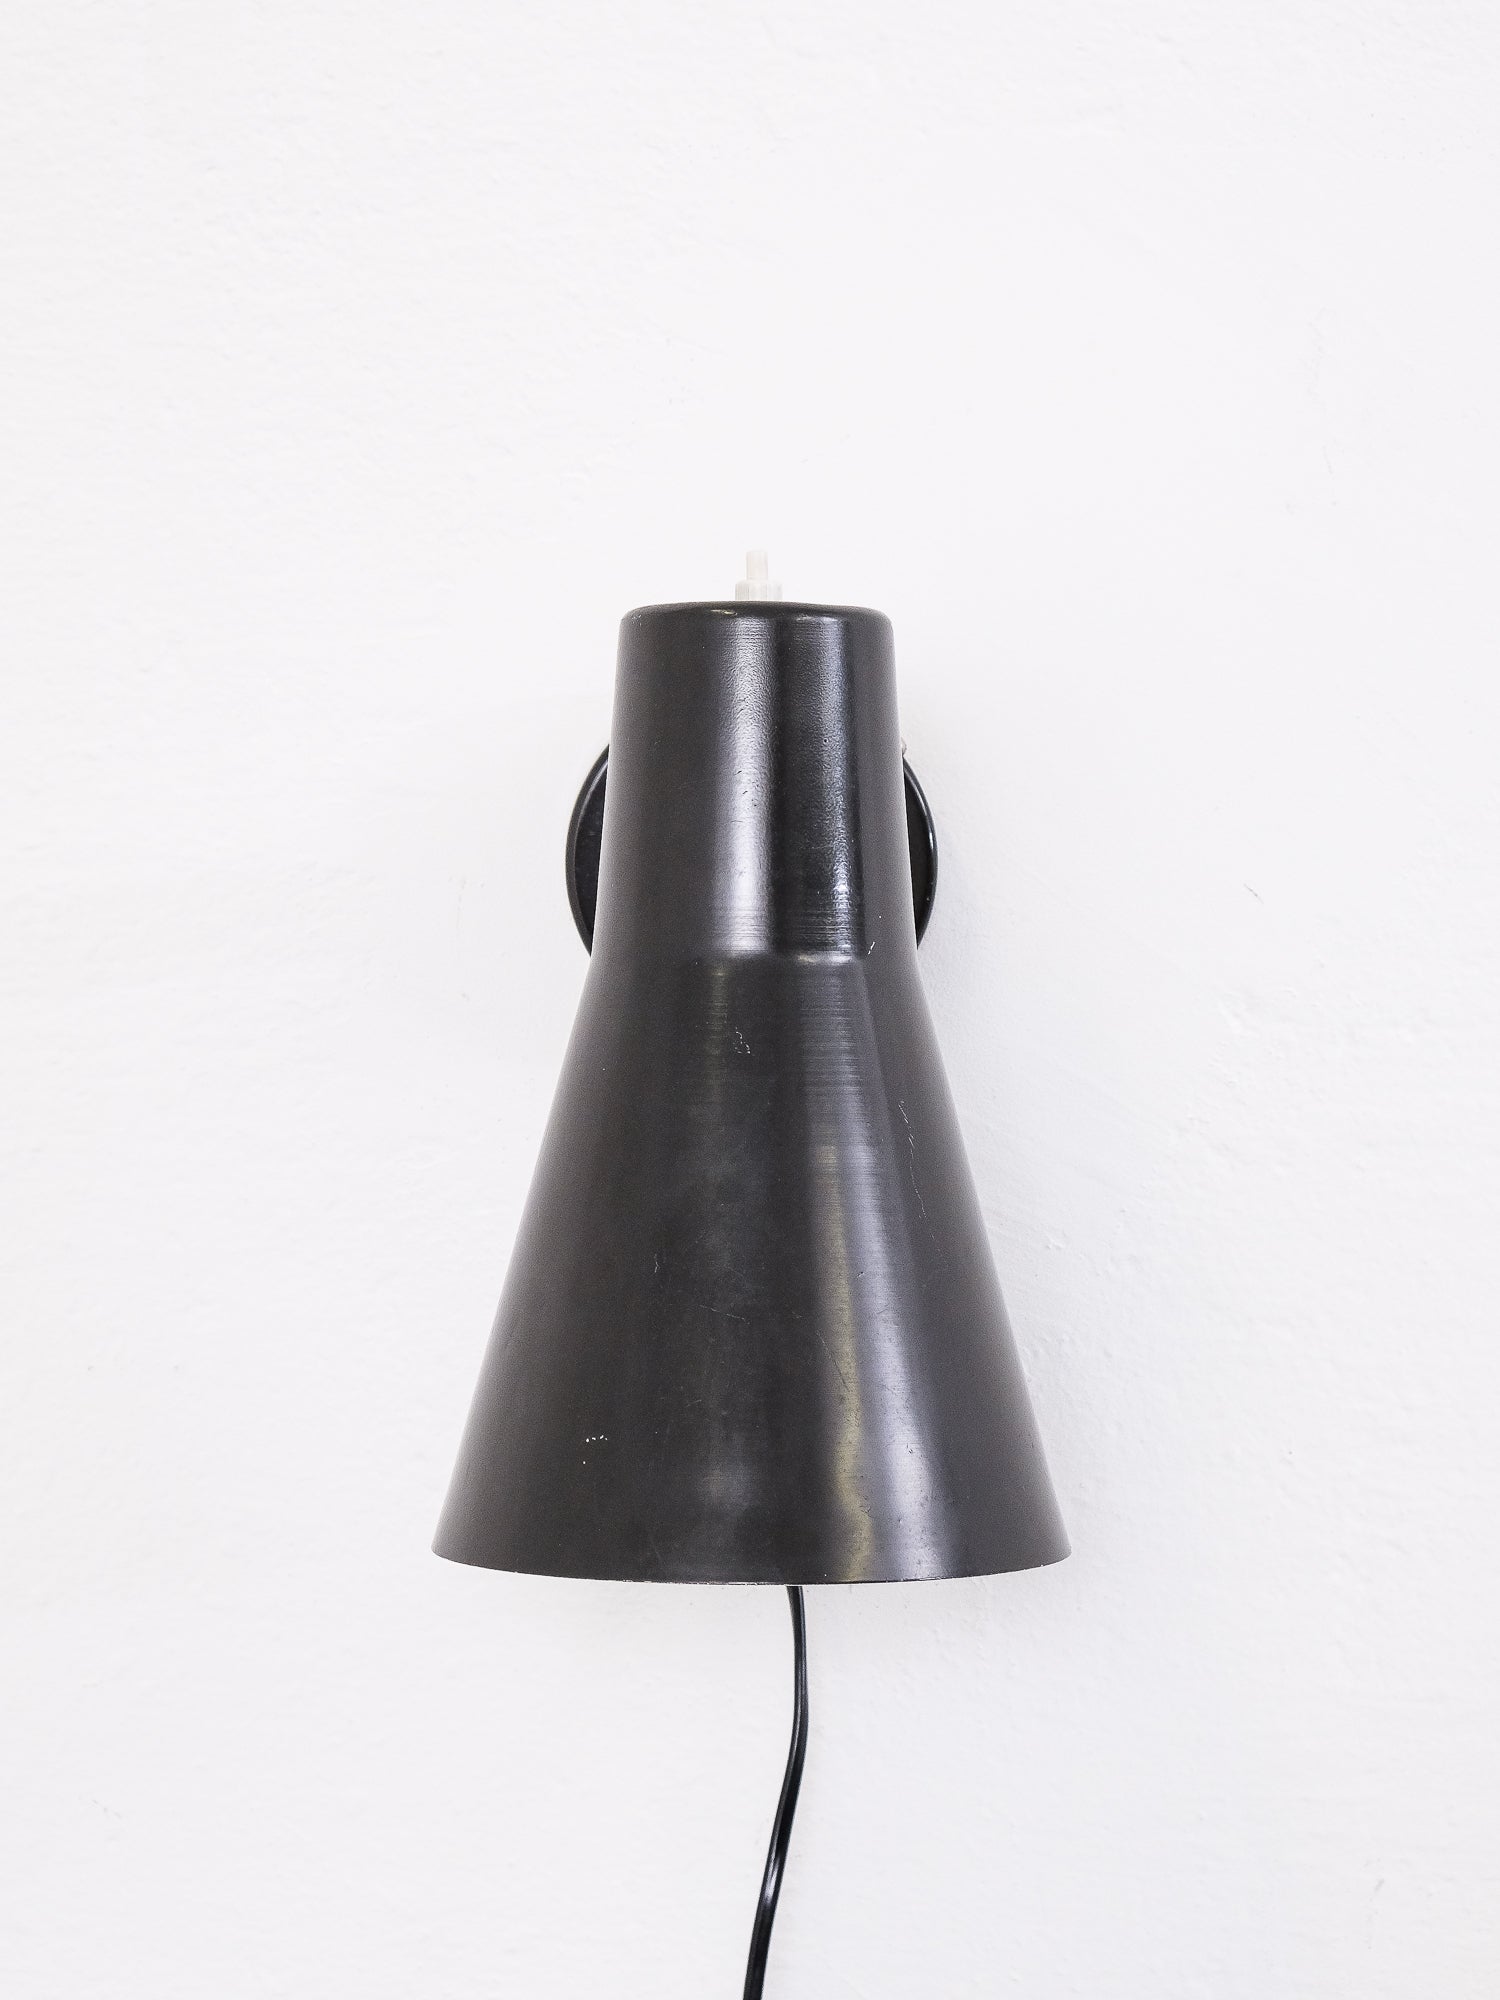 Wall Light Model 13-003 by Lisa Johansson-Pape for Stockmann Orno, 1960s